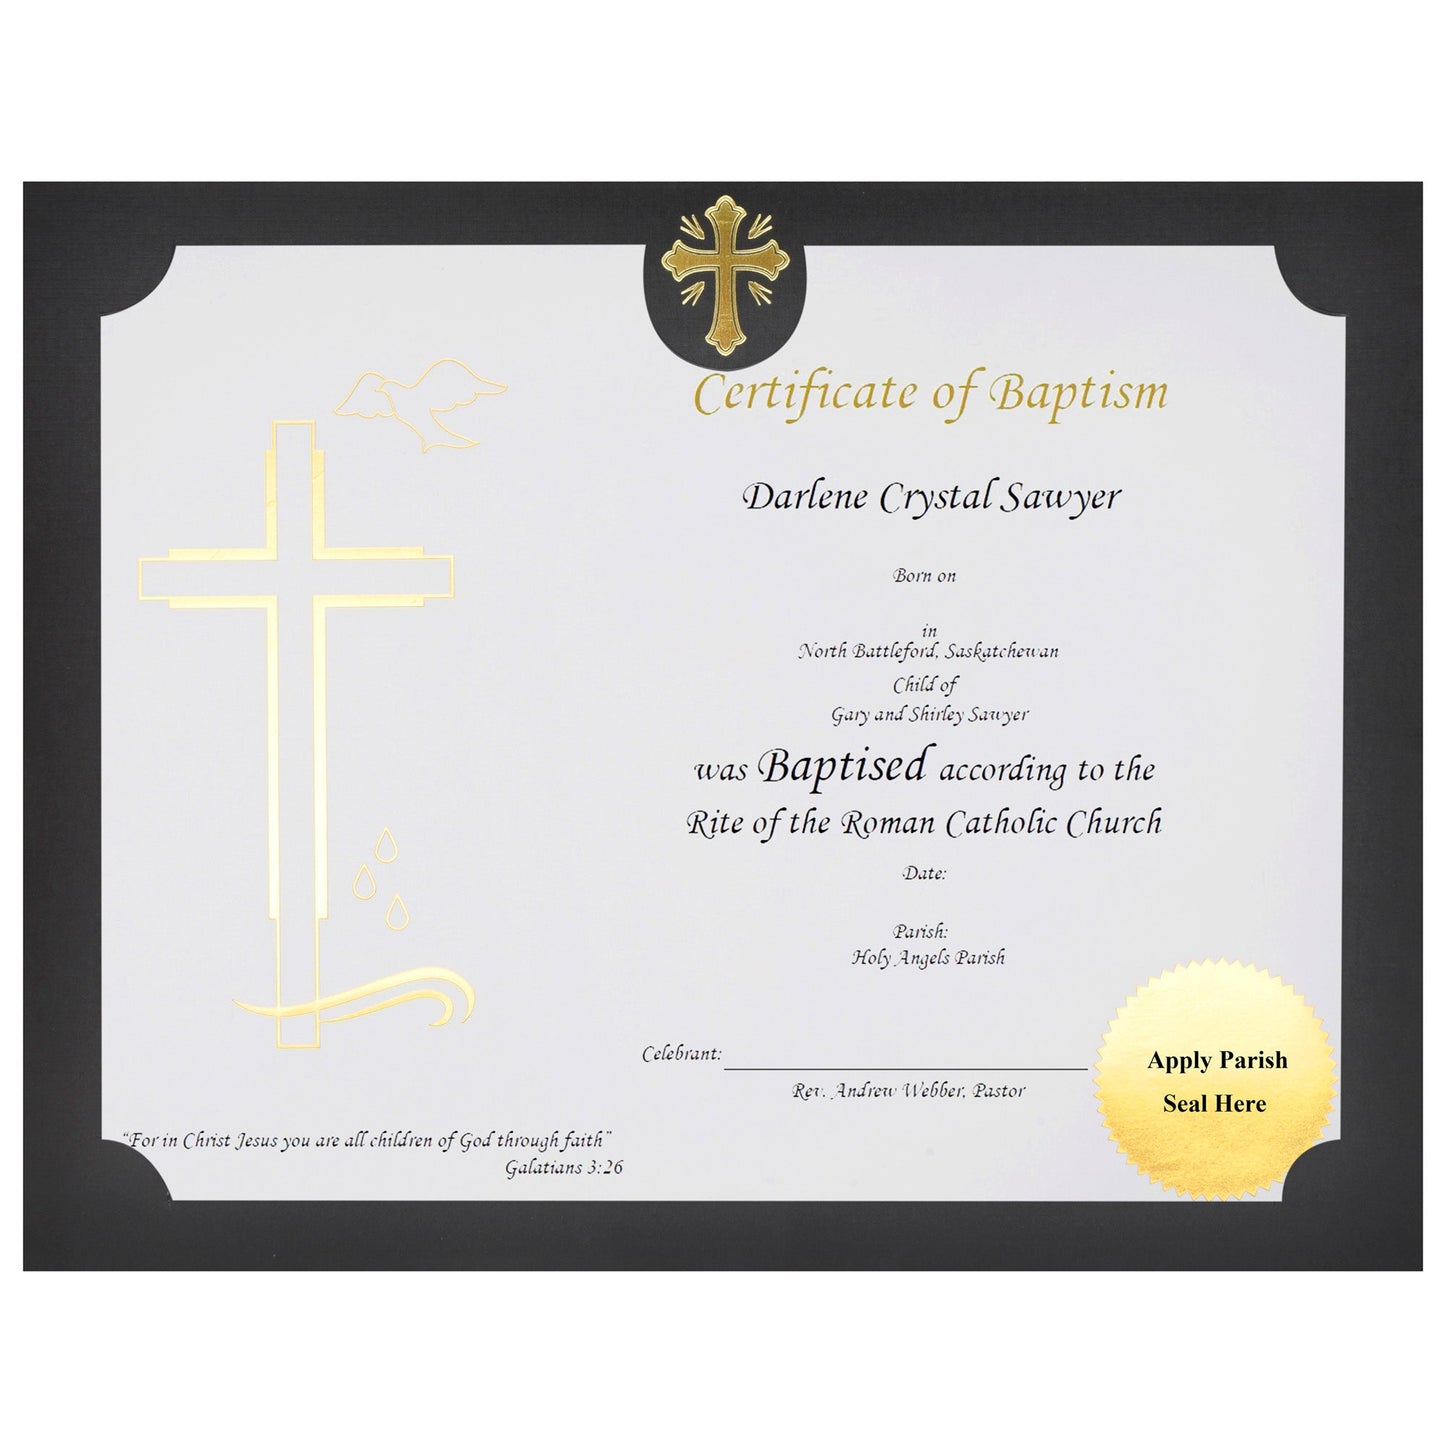 St. James® Religious Certificates - Baptism Certificates, 65 lb, Gold Foil, White Card Stock, Pack of 50